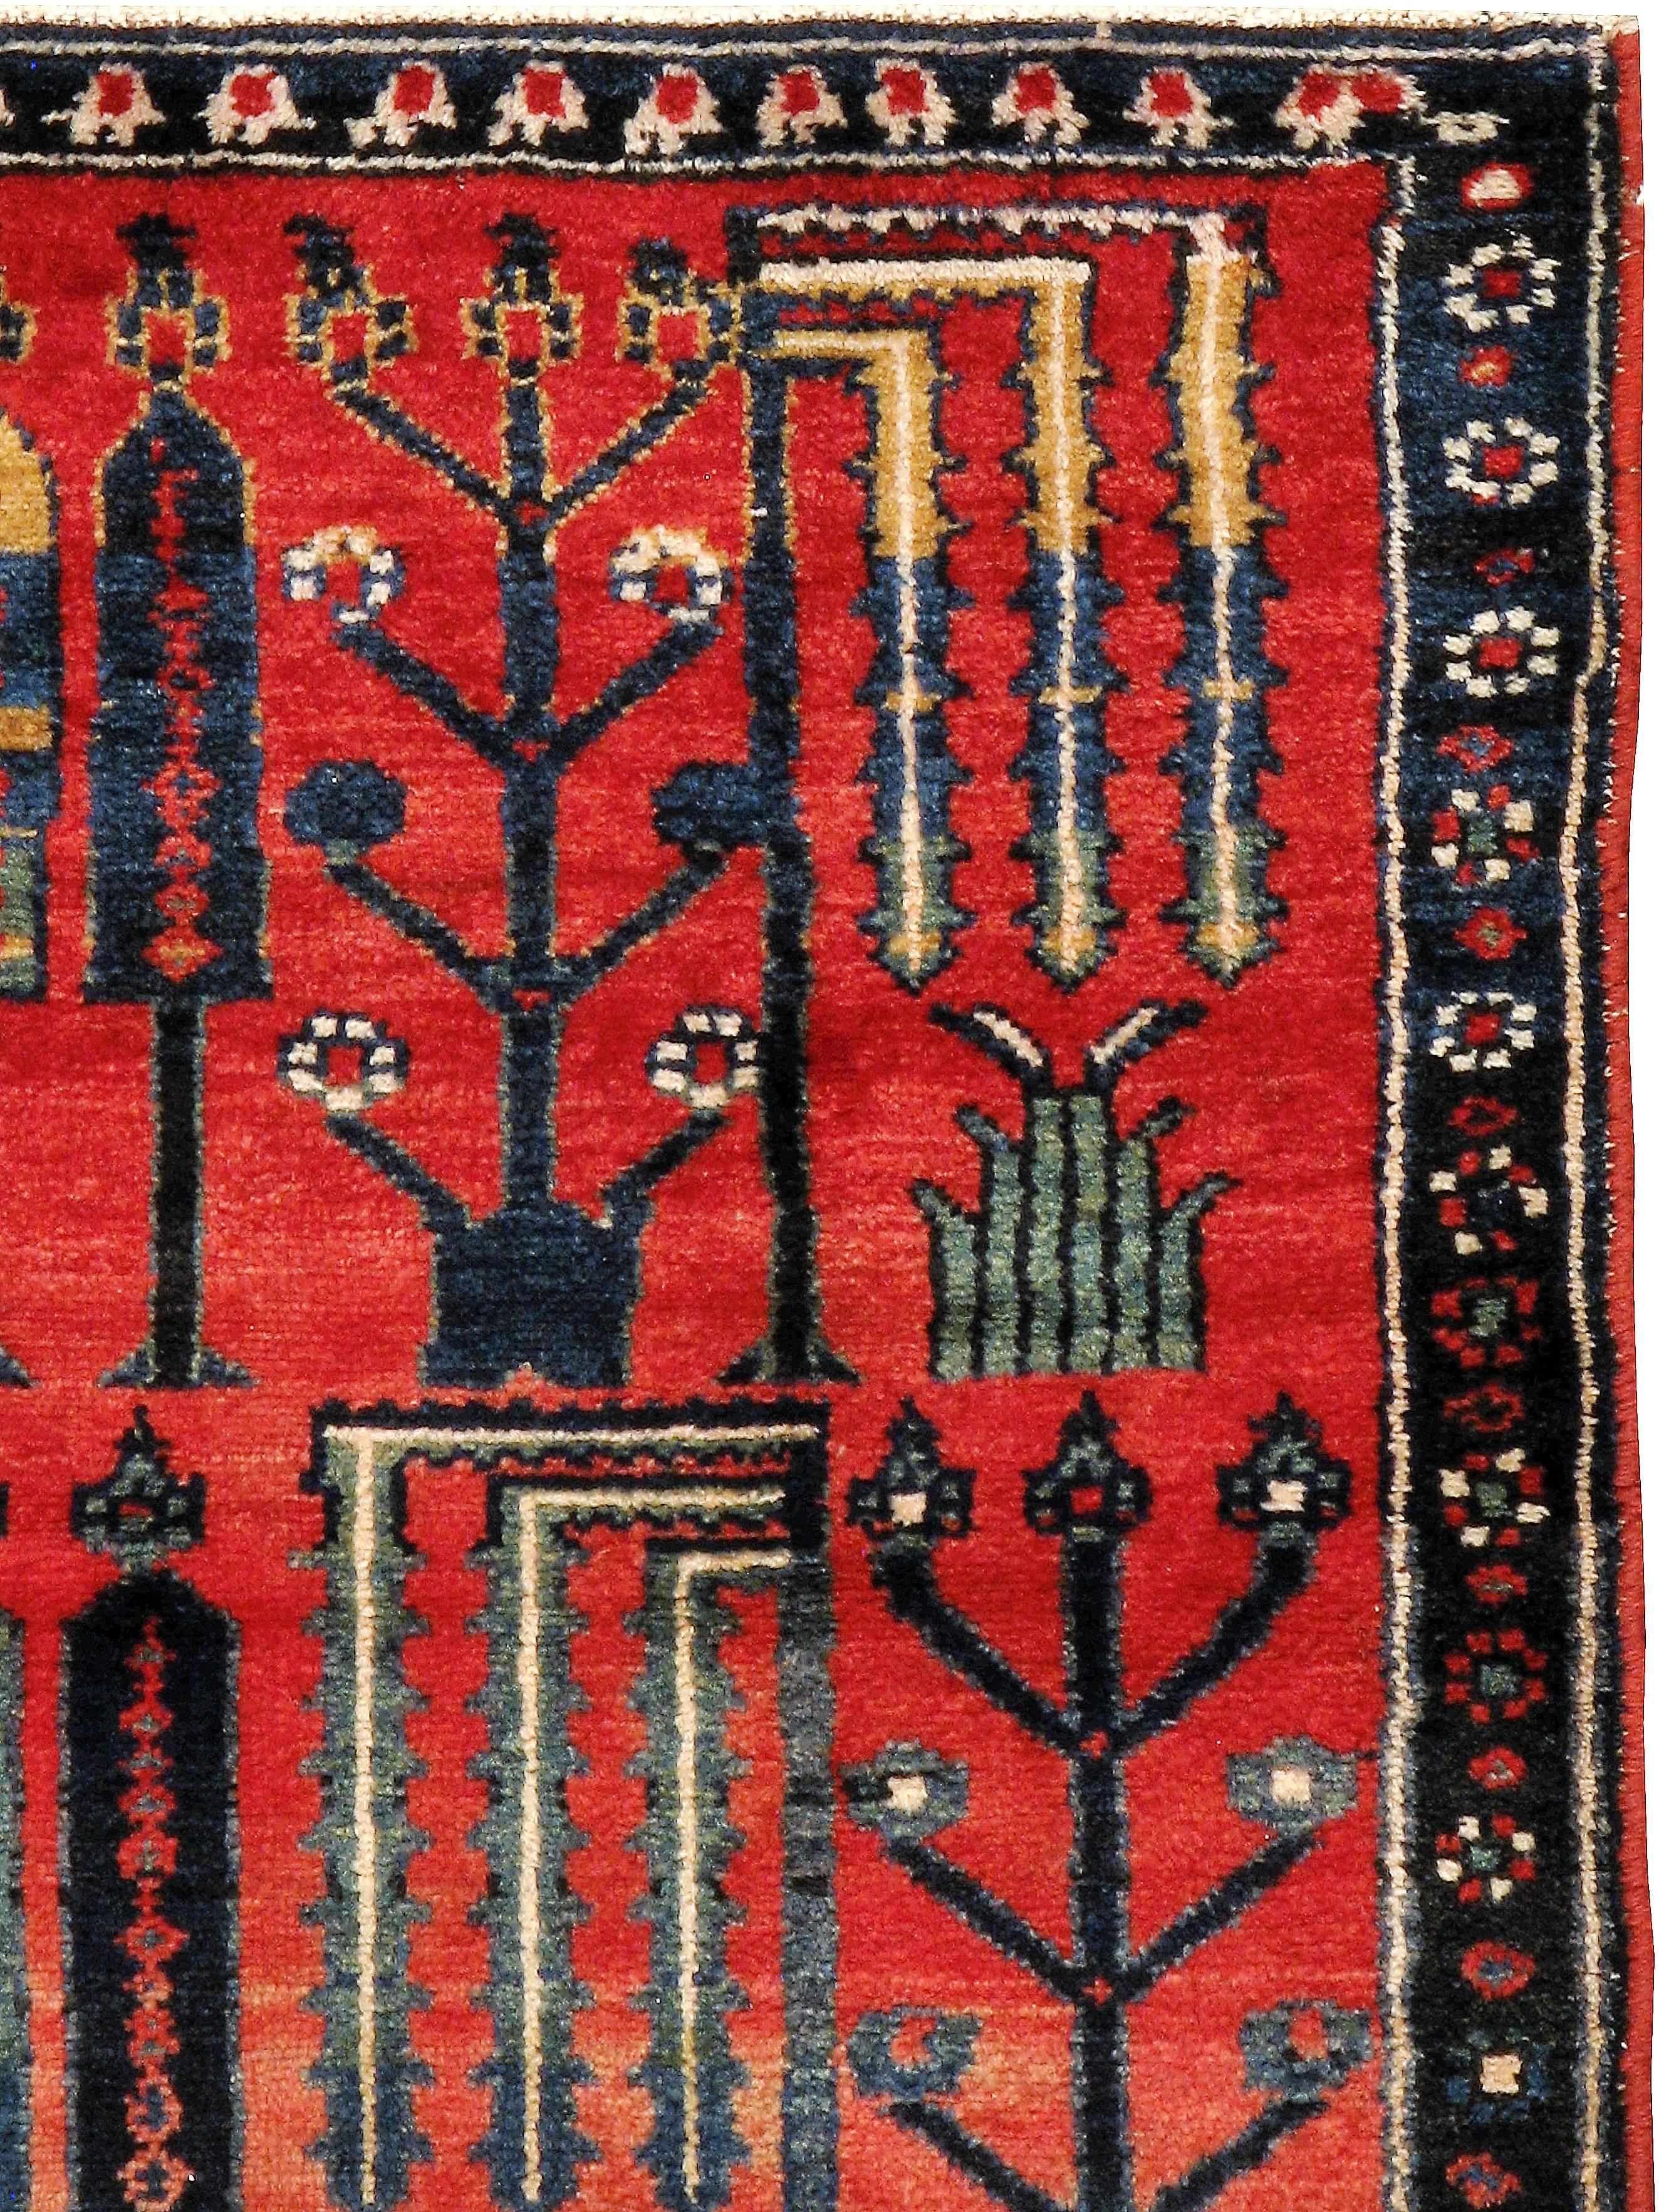 An antique Persian Bakhtiari carpet from the second quarter of the 20th century.